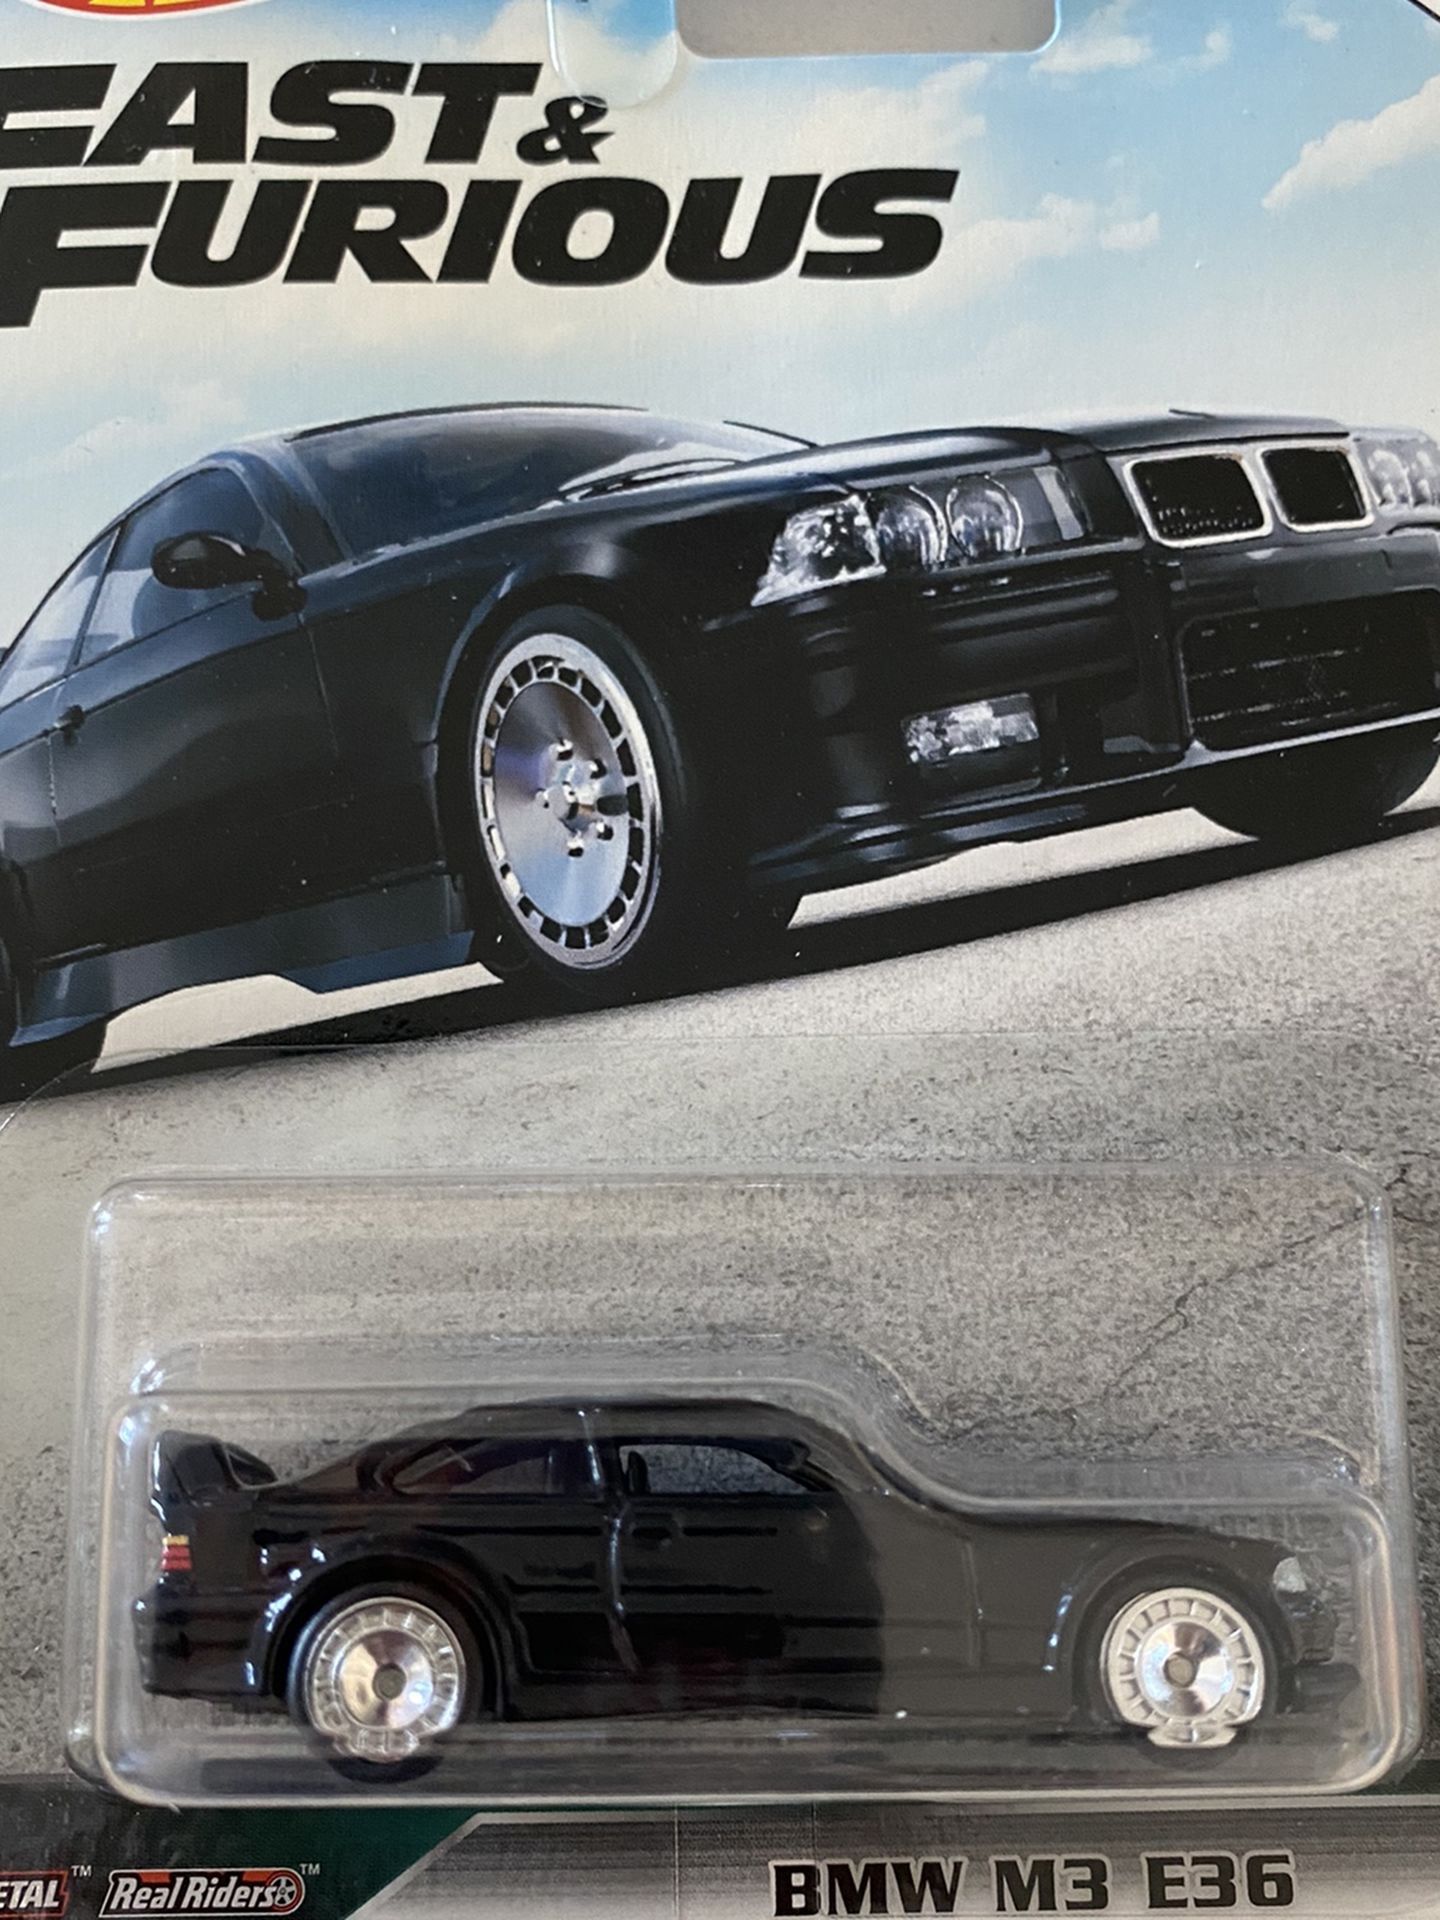 Hot Wheels Fast And Furious BMW M3 E36